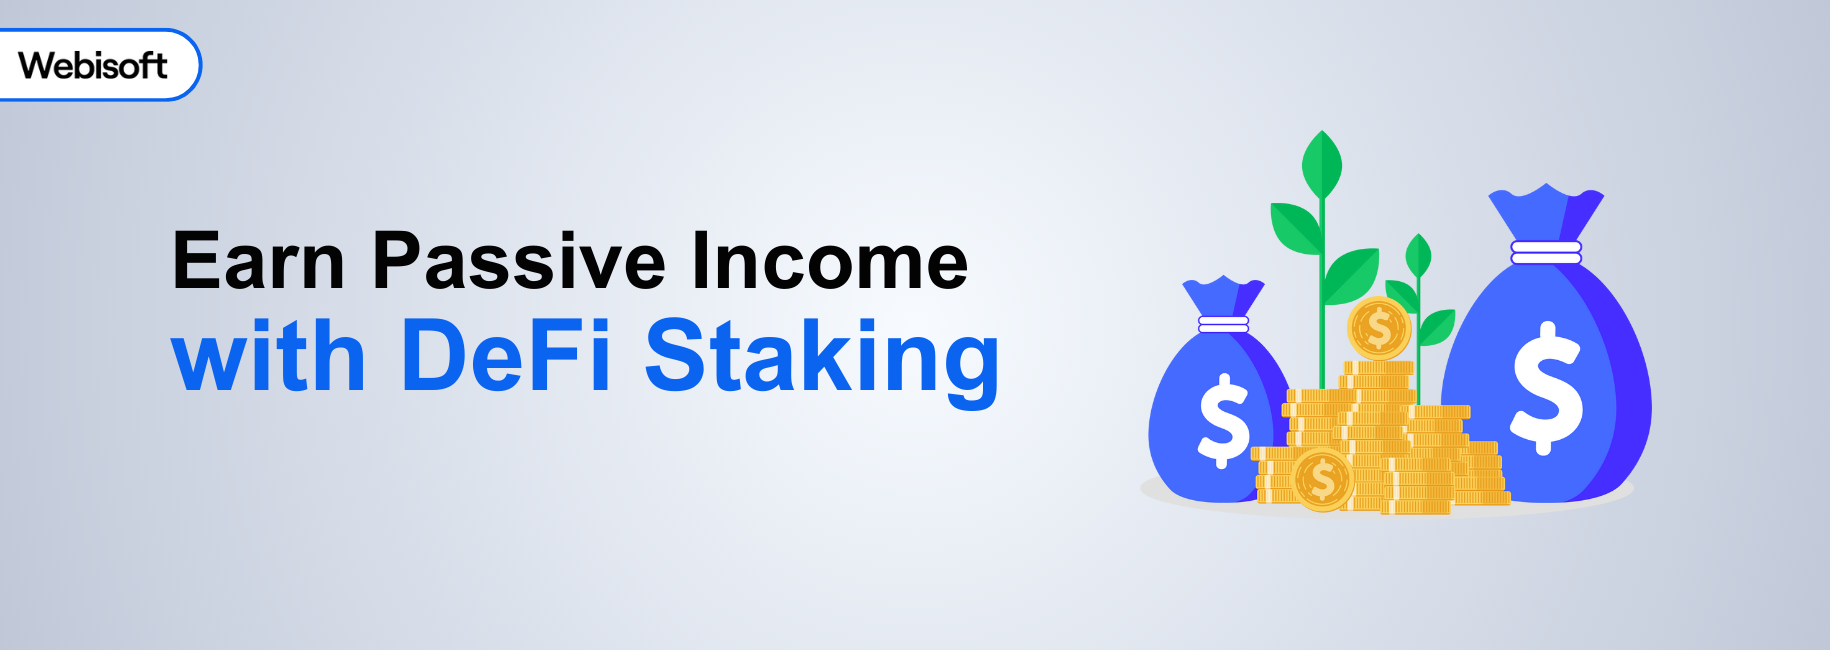 Earn Passive Income with DeFi Staking